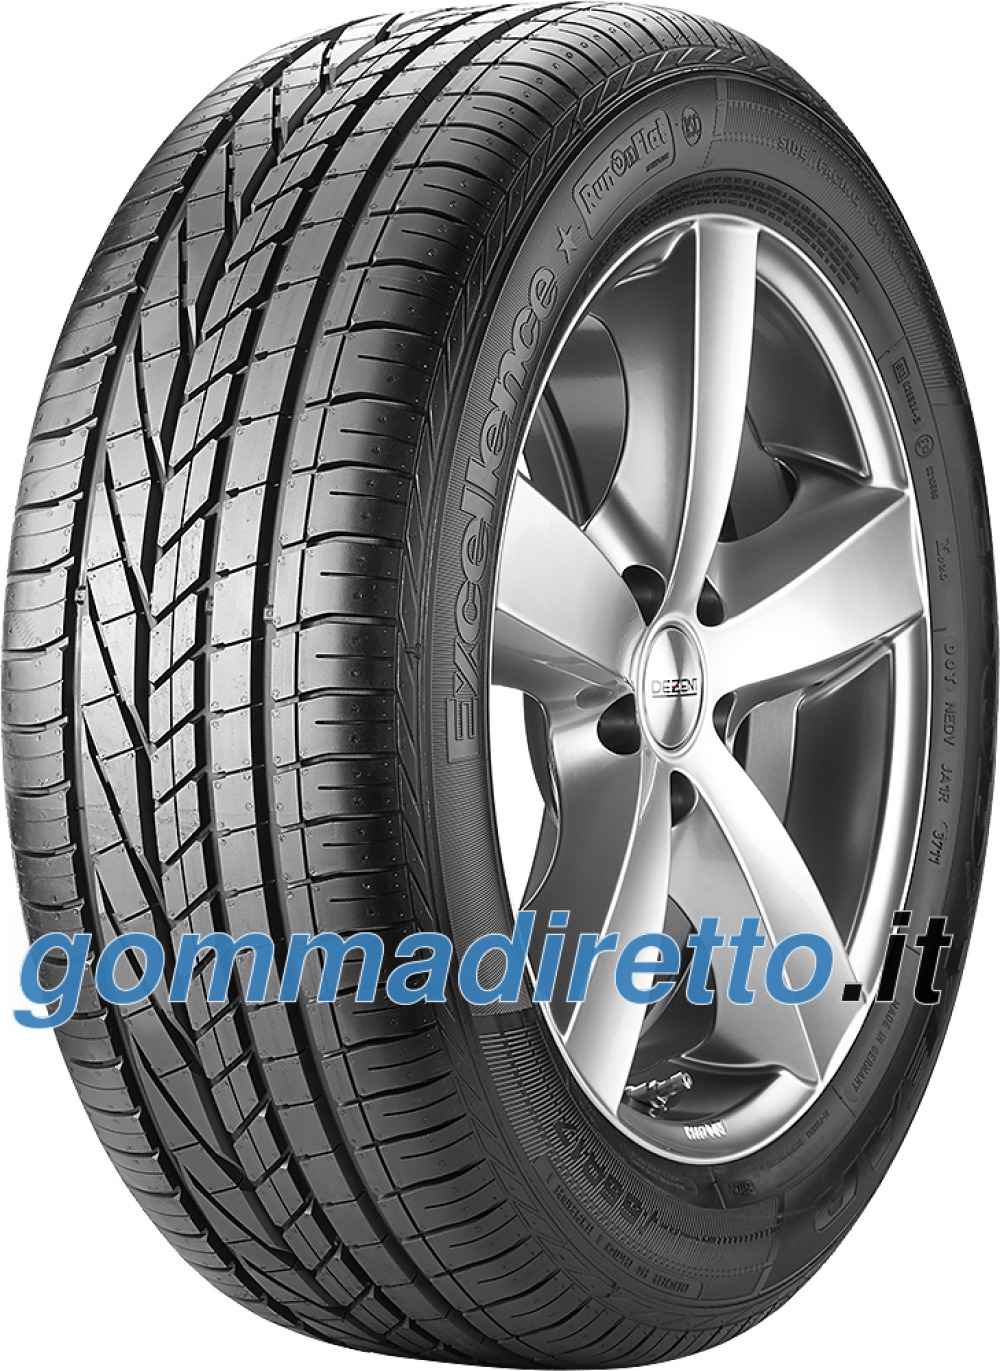 Image of Goodyear Excellence ROF ( 245/40 R19 98Y XL *, runflat )